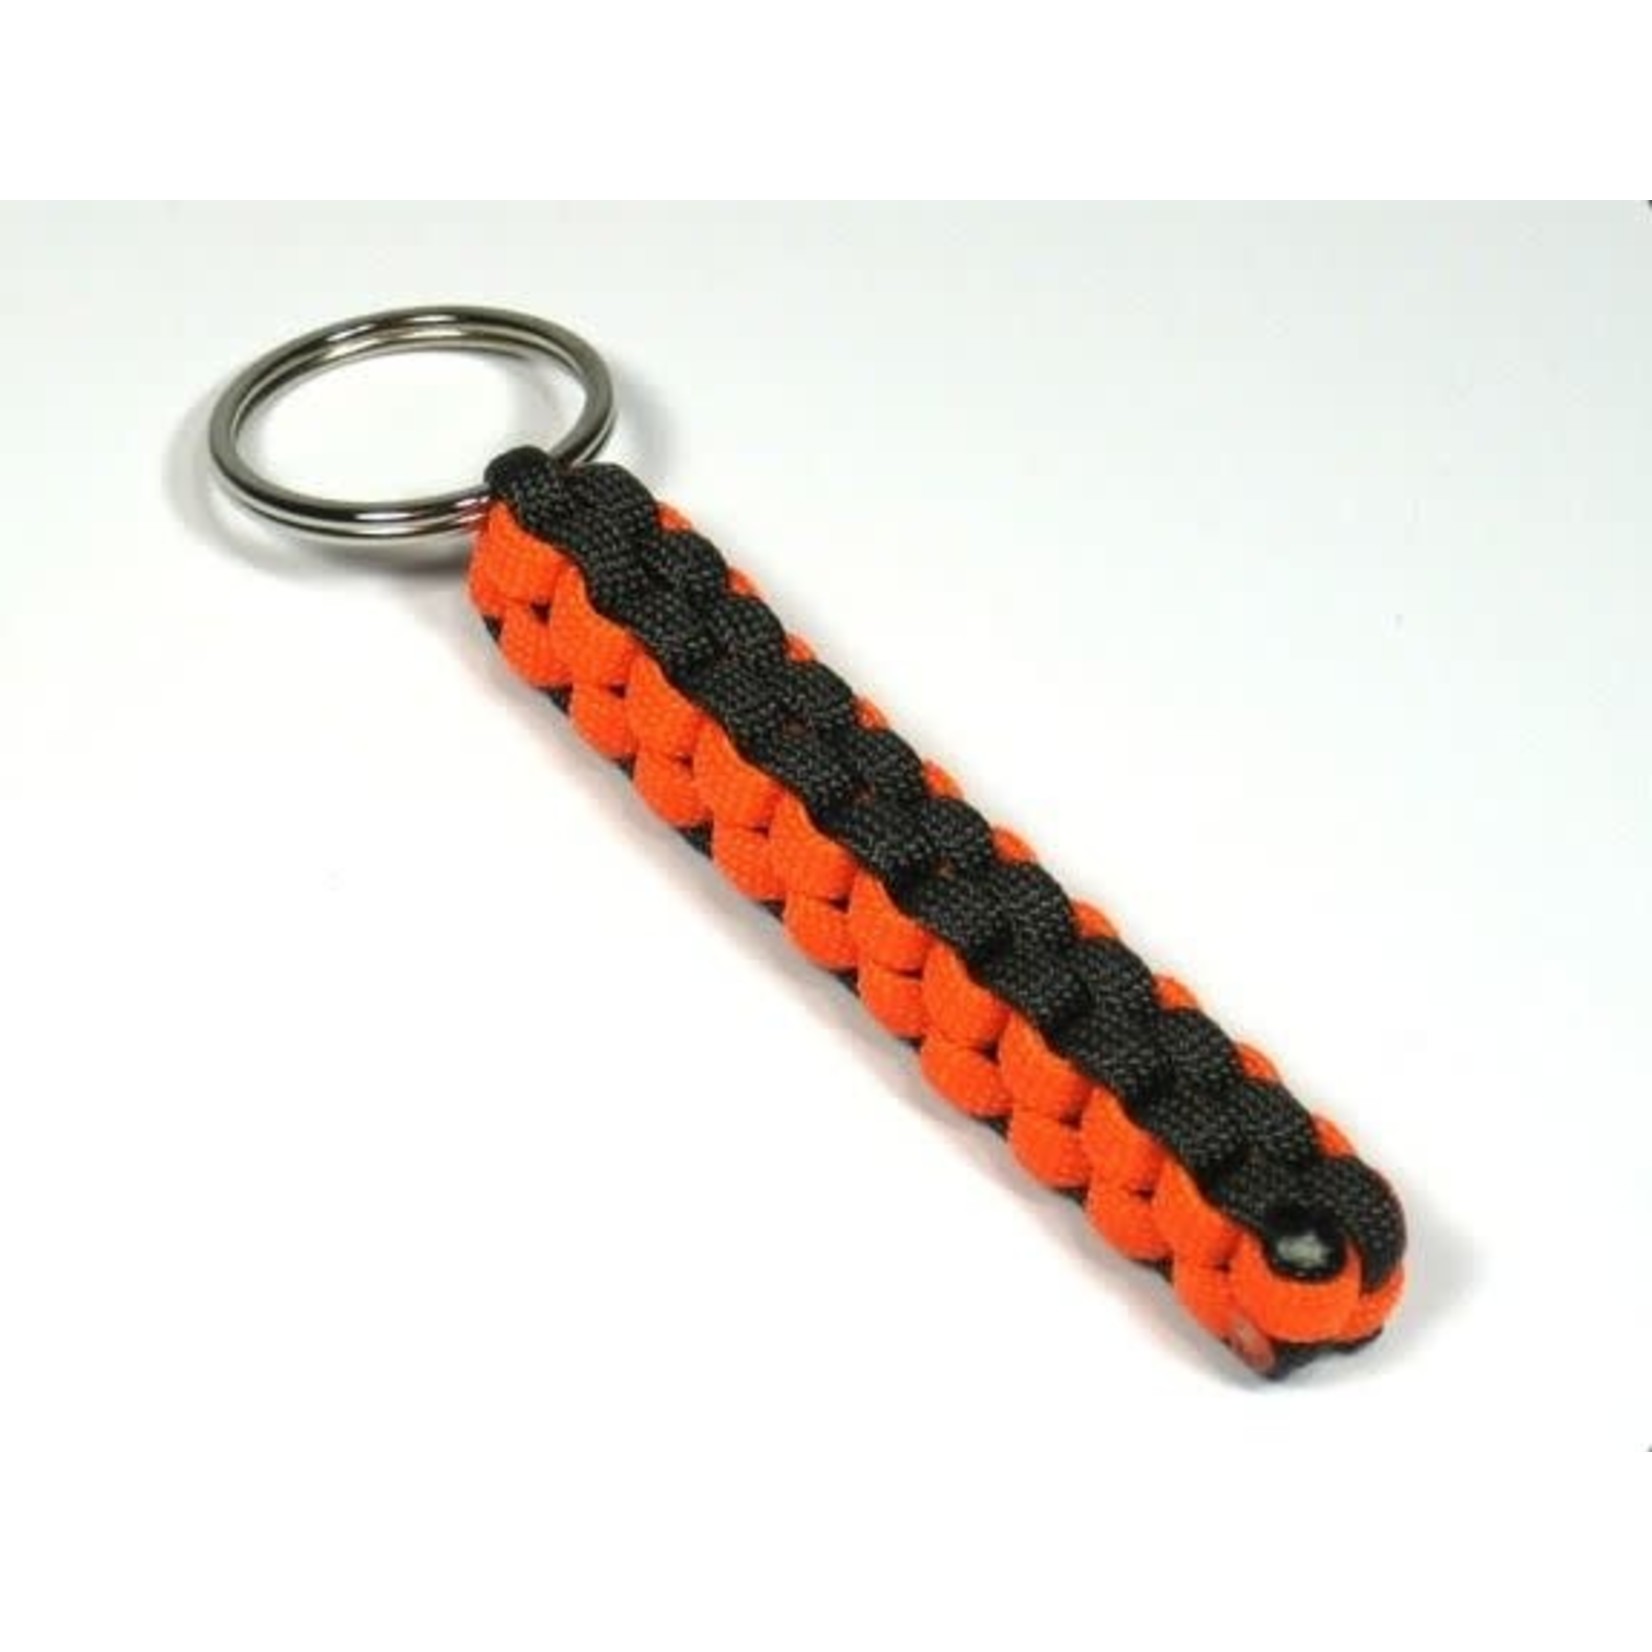 Josh Miller Paracord Keychain (any size)